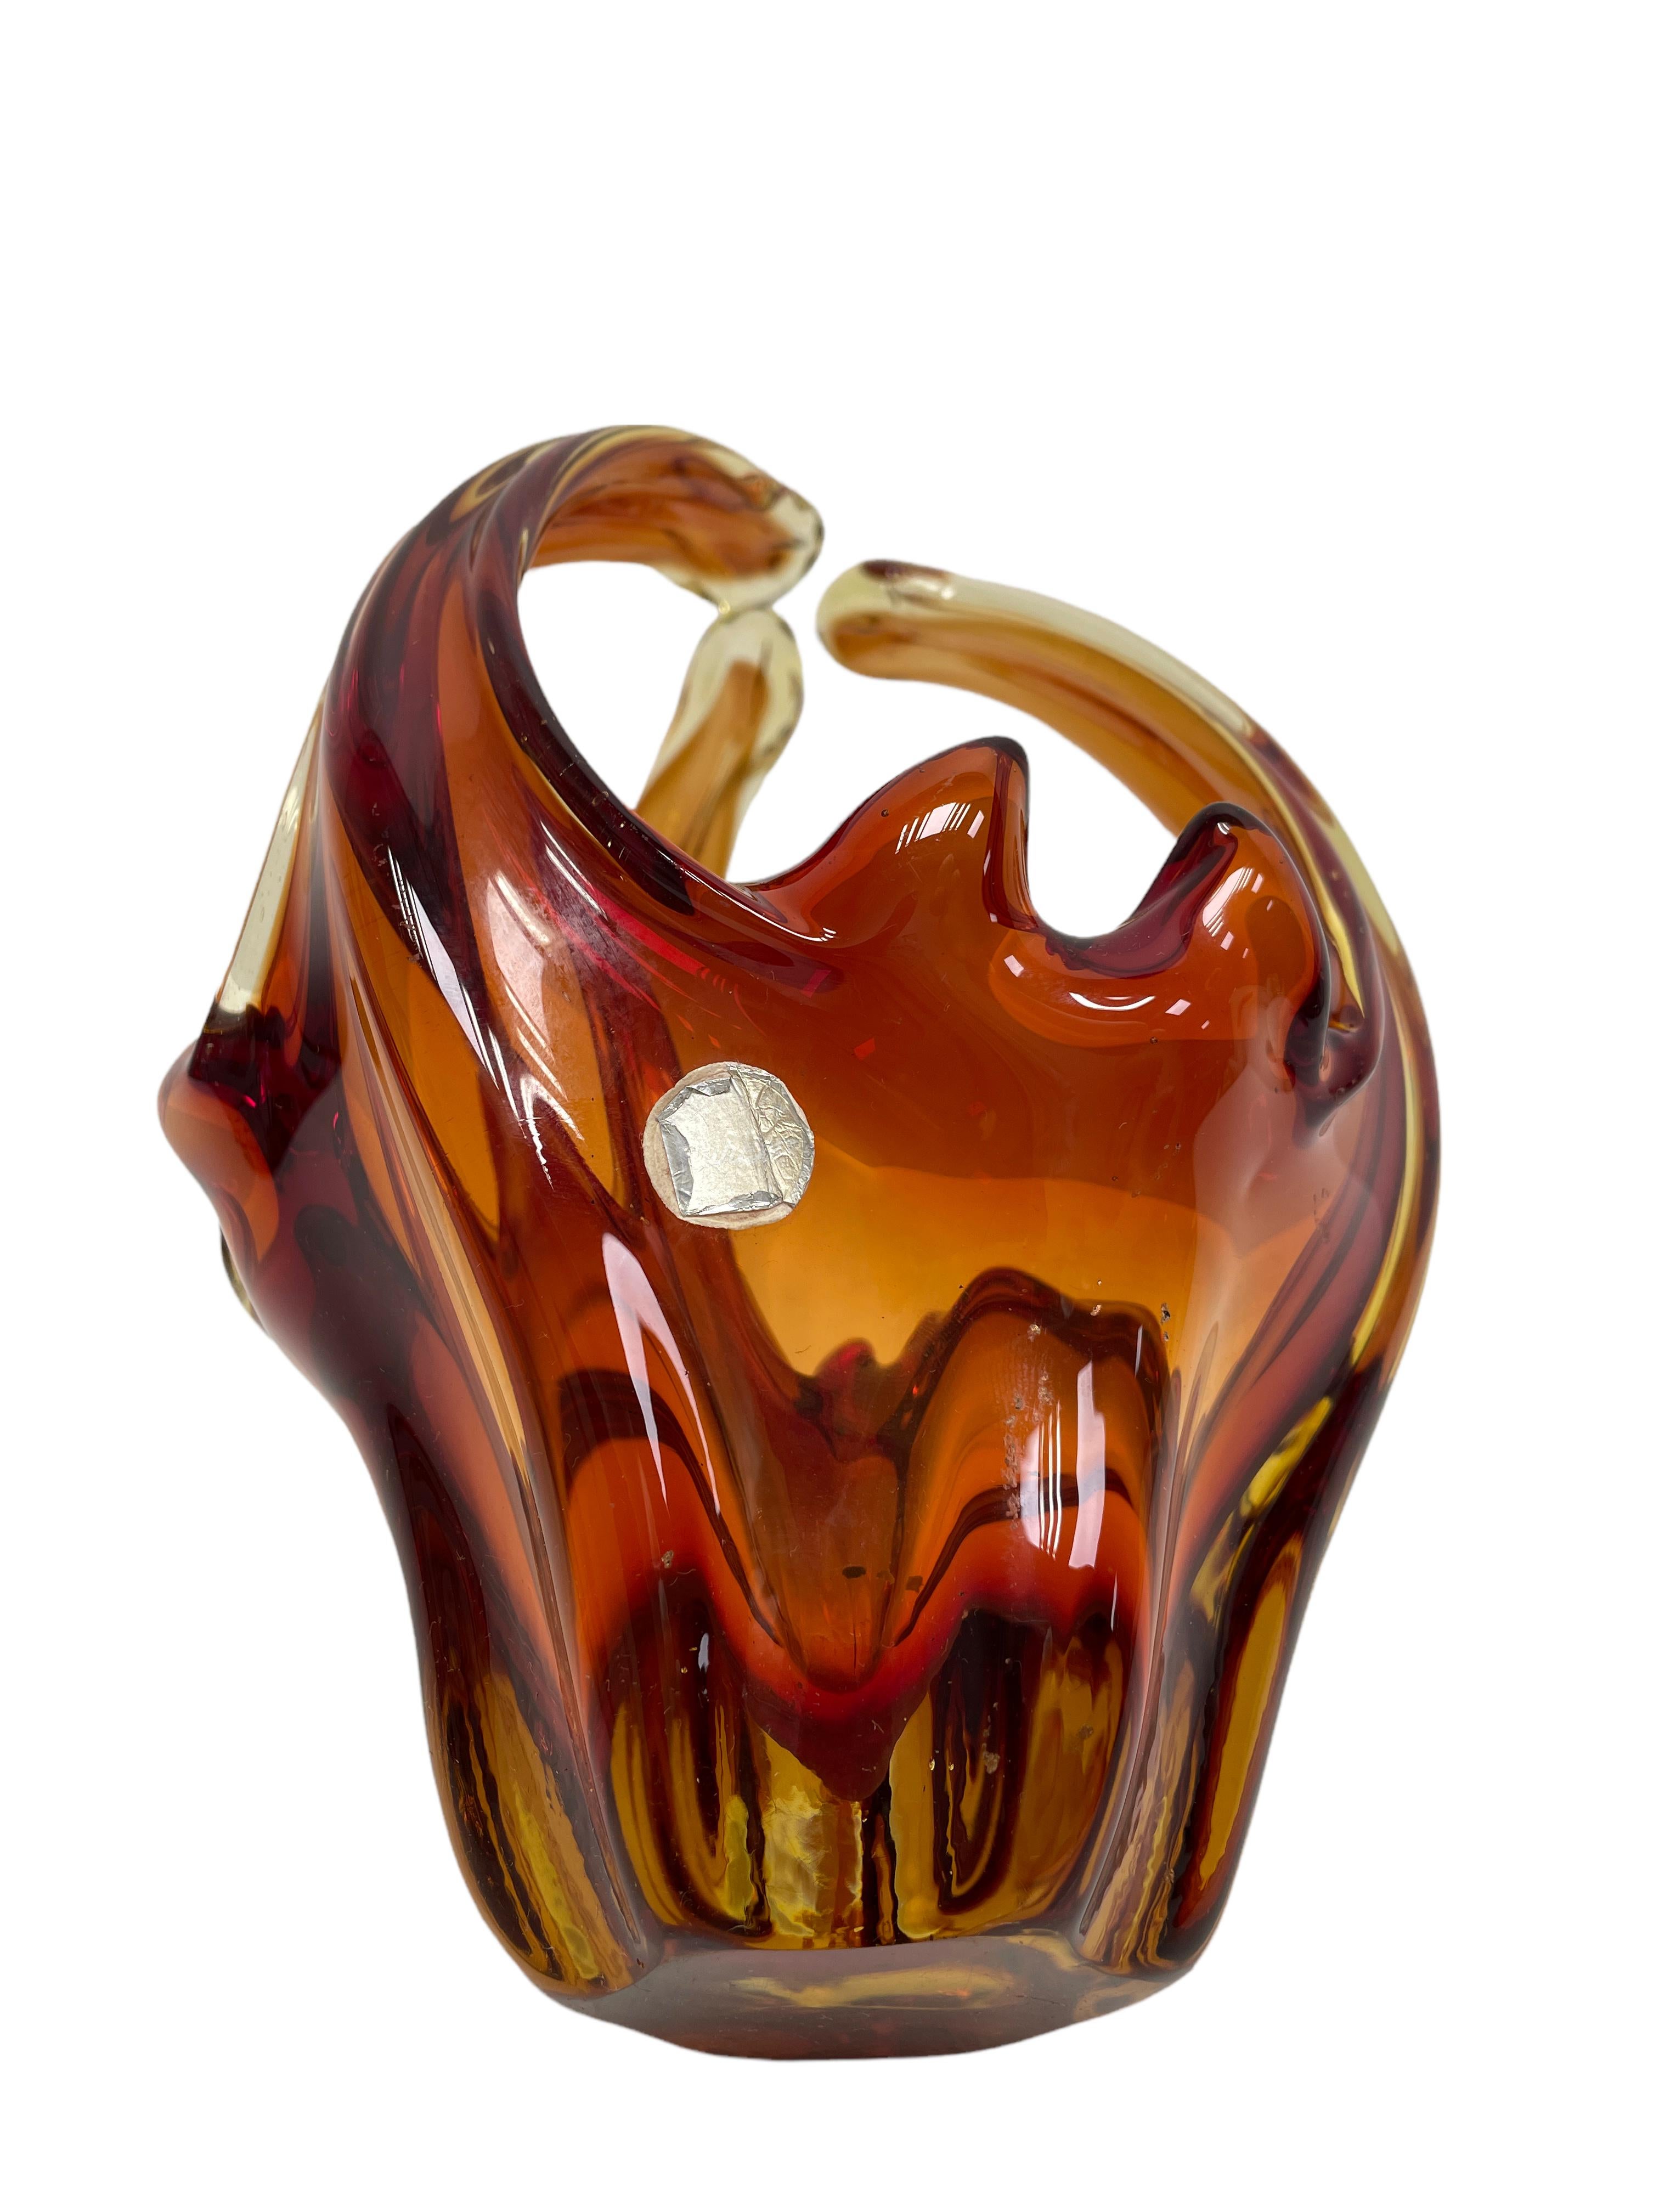 Hand-Crafted Murano Art Glass Amber Brown Basket Fruit Bowl Catchall Italy, Sommerso, 1970s